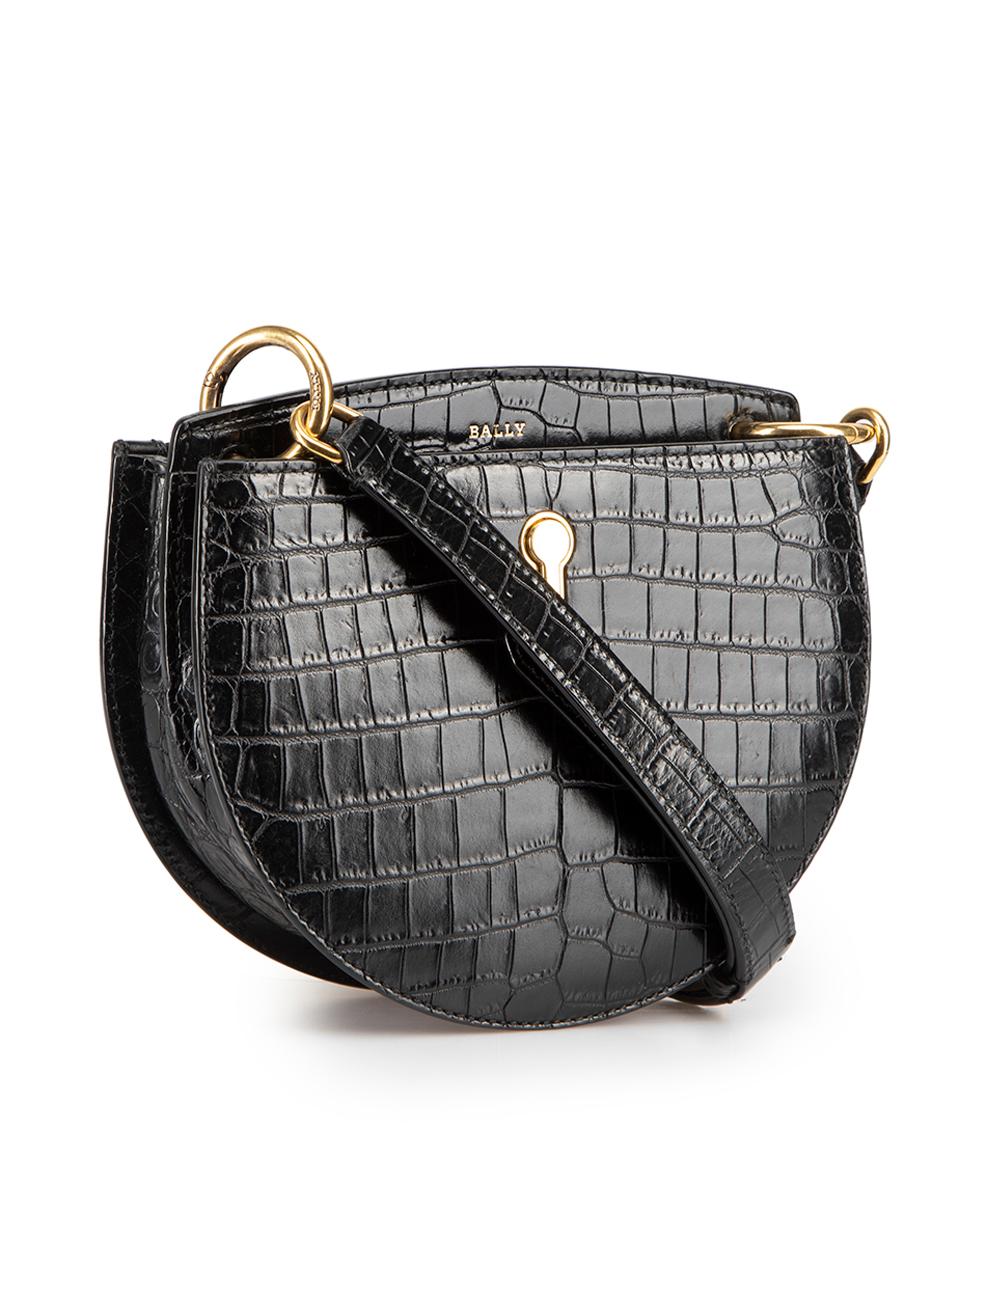 CONDITION is Very good. Minimal wear to handbag is evident. Minor scratching along outer hardware on this used Bally designer resale item. This item comes with original dustbag.



Details


Black

Leather

Mini crossbody bag

Crocodile embossed